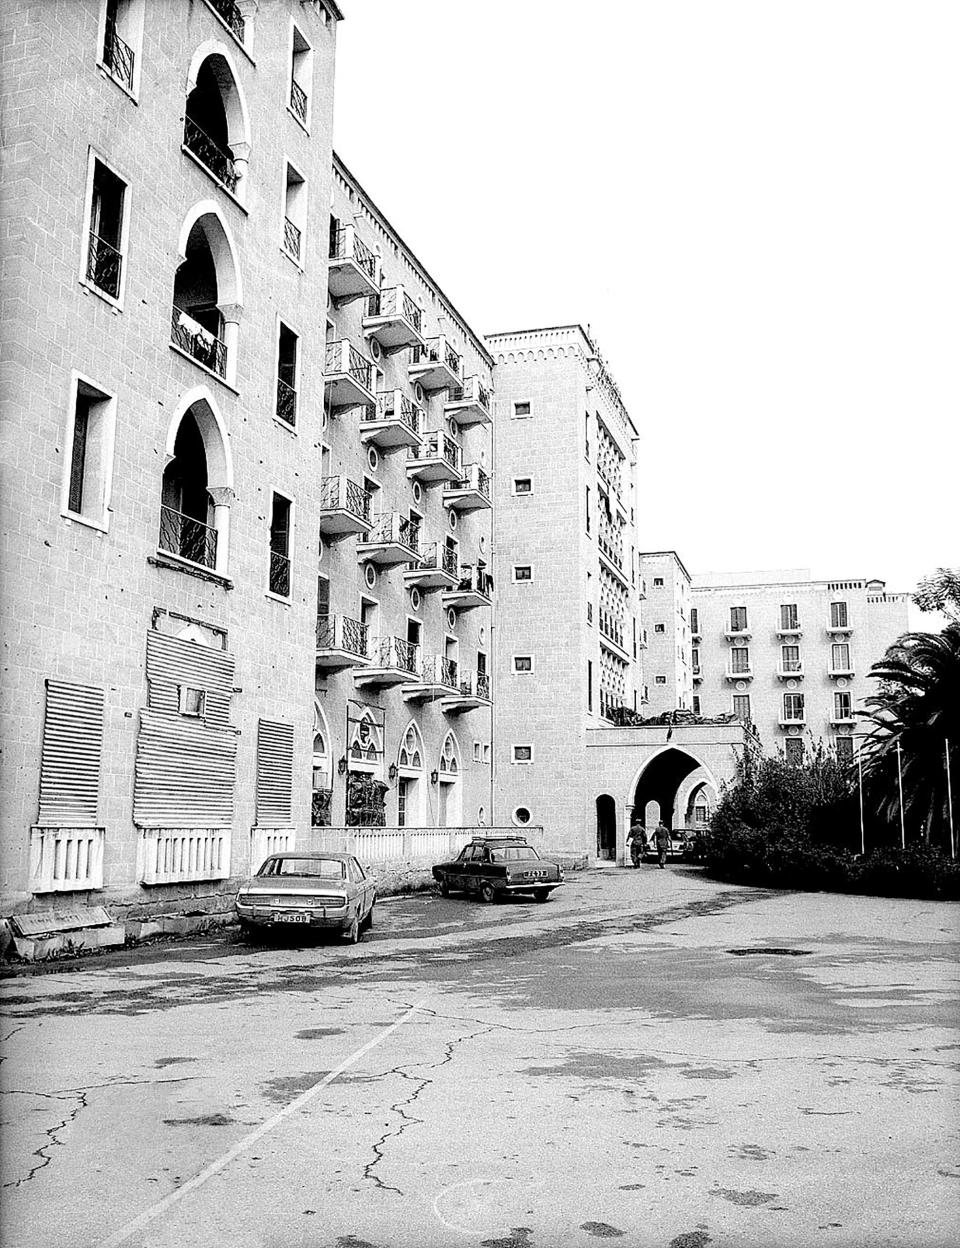 This 1974 photo provided from the Cyprus' press and informations office shows the Ledra Palace Hotel as seen with the holes from bullets during the 1974 coup and the Turkish invasion, in the divided capital Nicosia, Cyprus. This grand hotel still manages to hold onto a flicker of its old majesty despite the mortal shell craters and bullet holes scarring its sandstone facade. Amid war in the summer of 1974 that cleaved Cyprus along ethnic lines, United Nations peacekeepers took over the Ledra Palace Hotel and instantly turned it into an emblem of the east Mediterranean island nation's division. (Press and informations Office via AP)